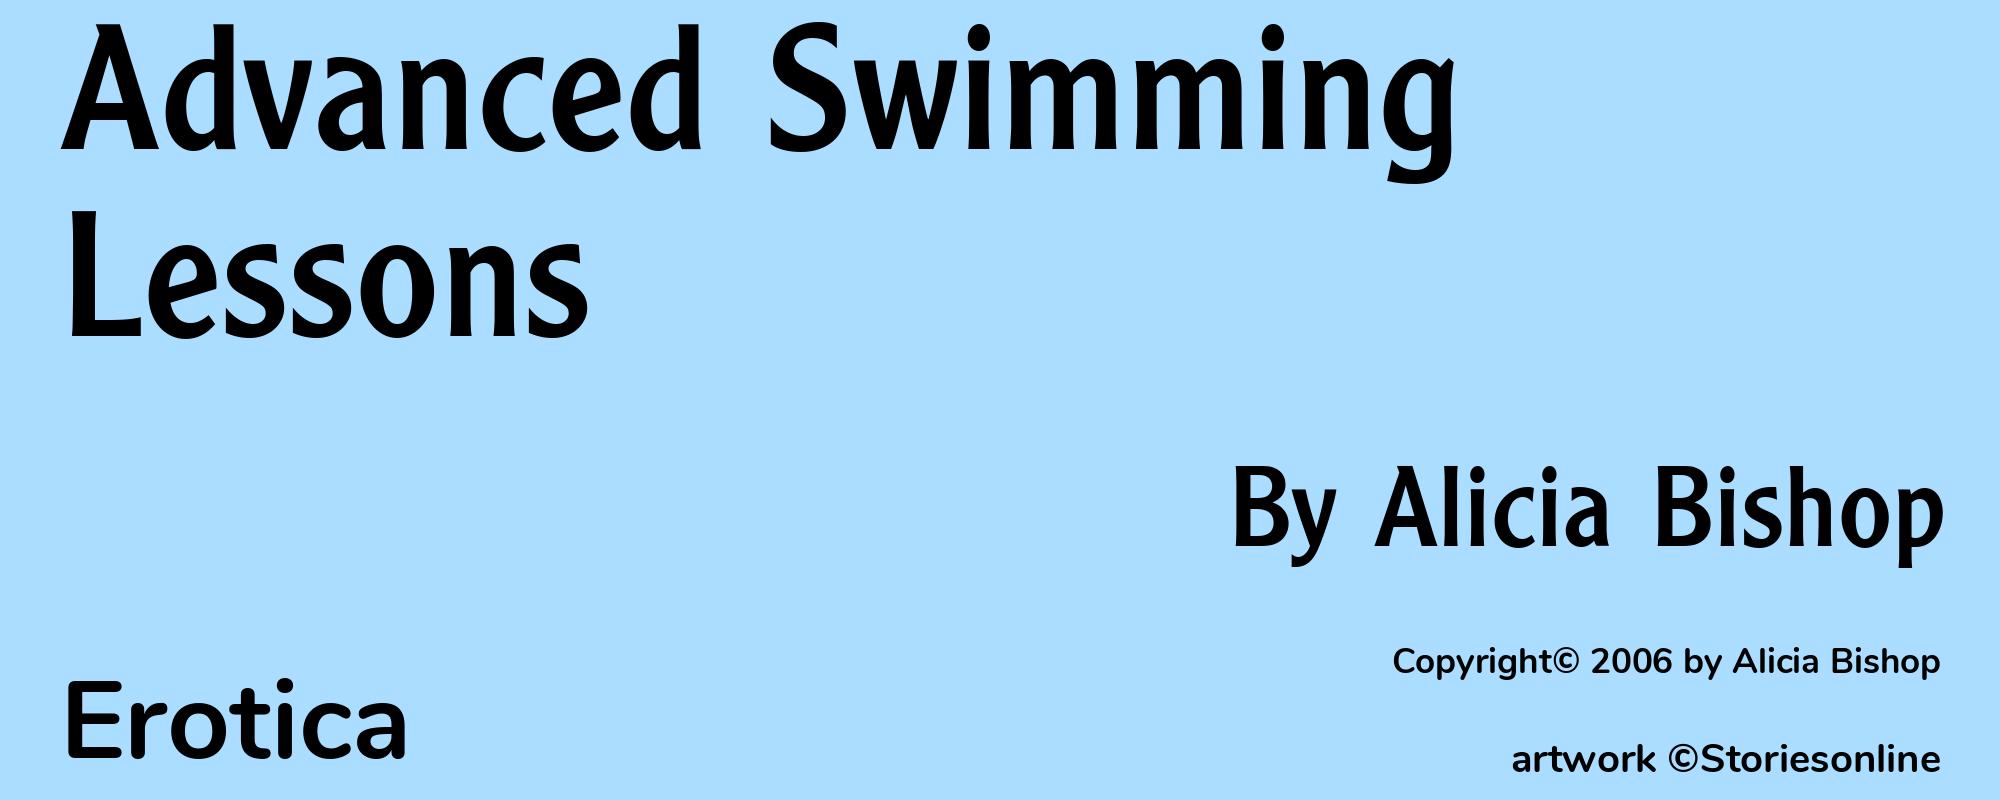 Advanced Swimming Lessons - Cover